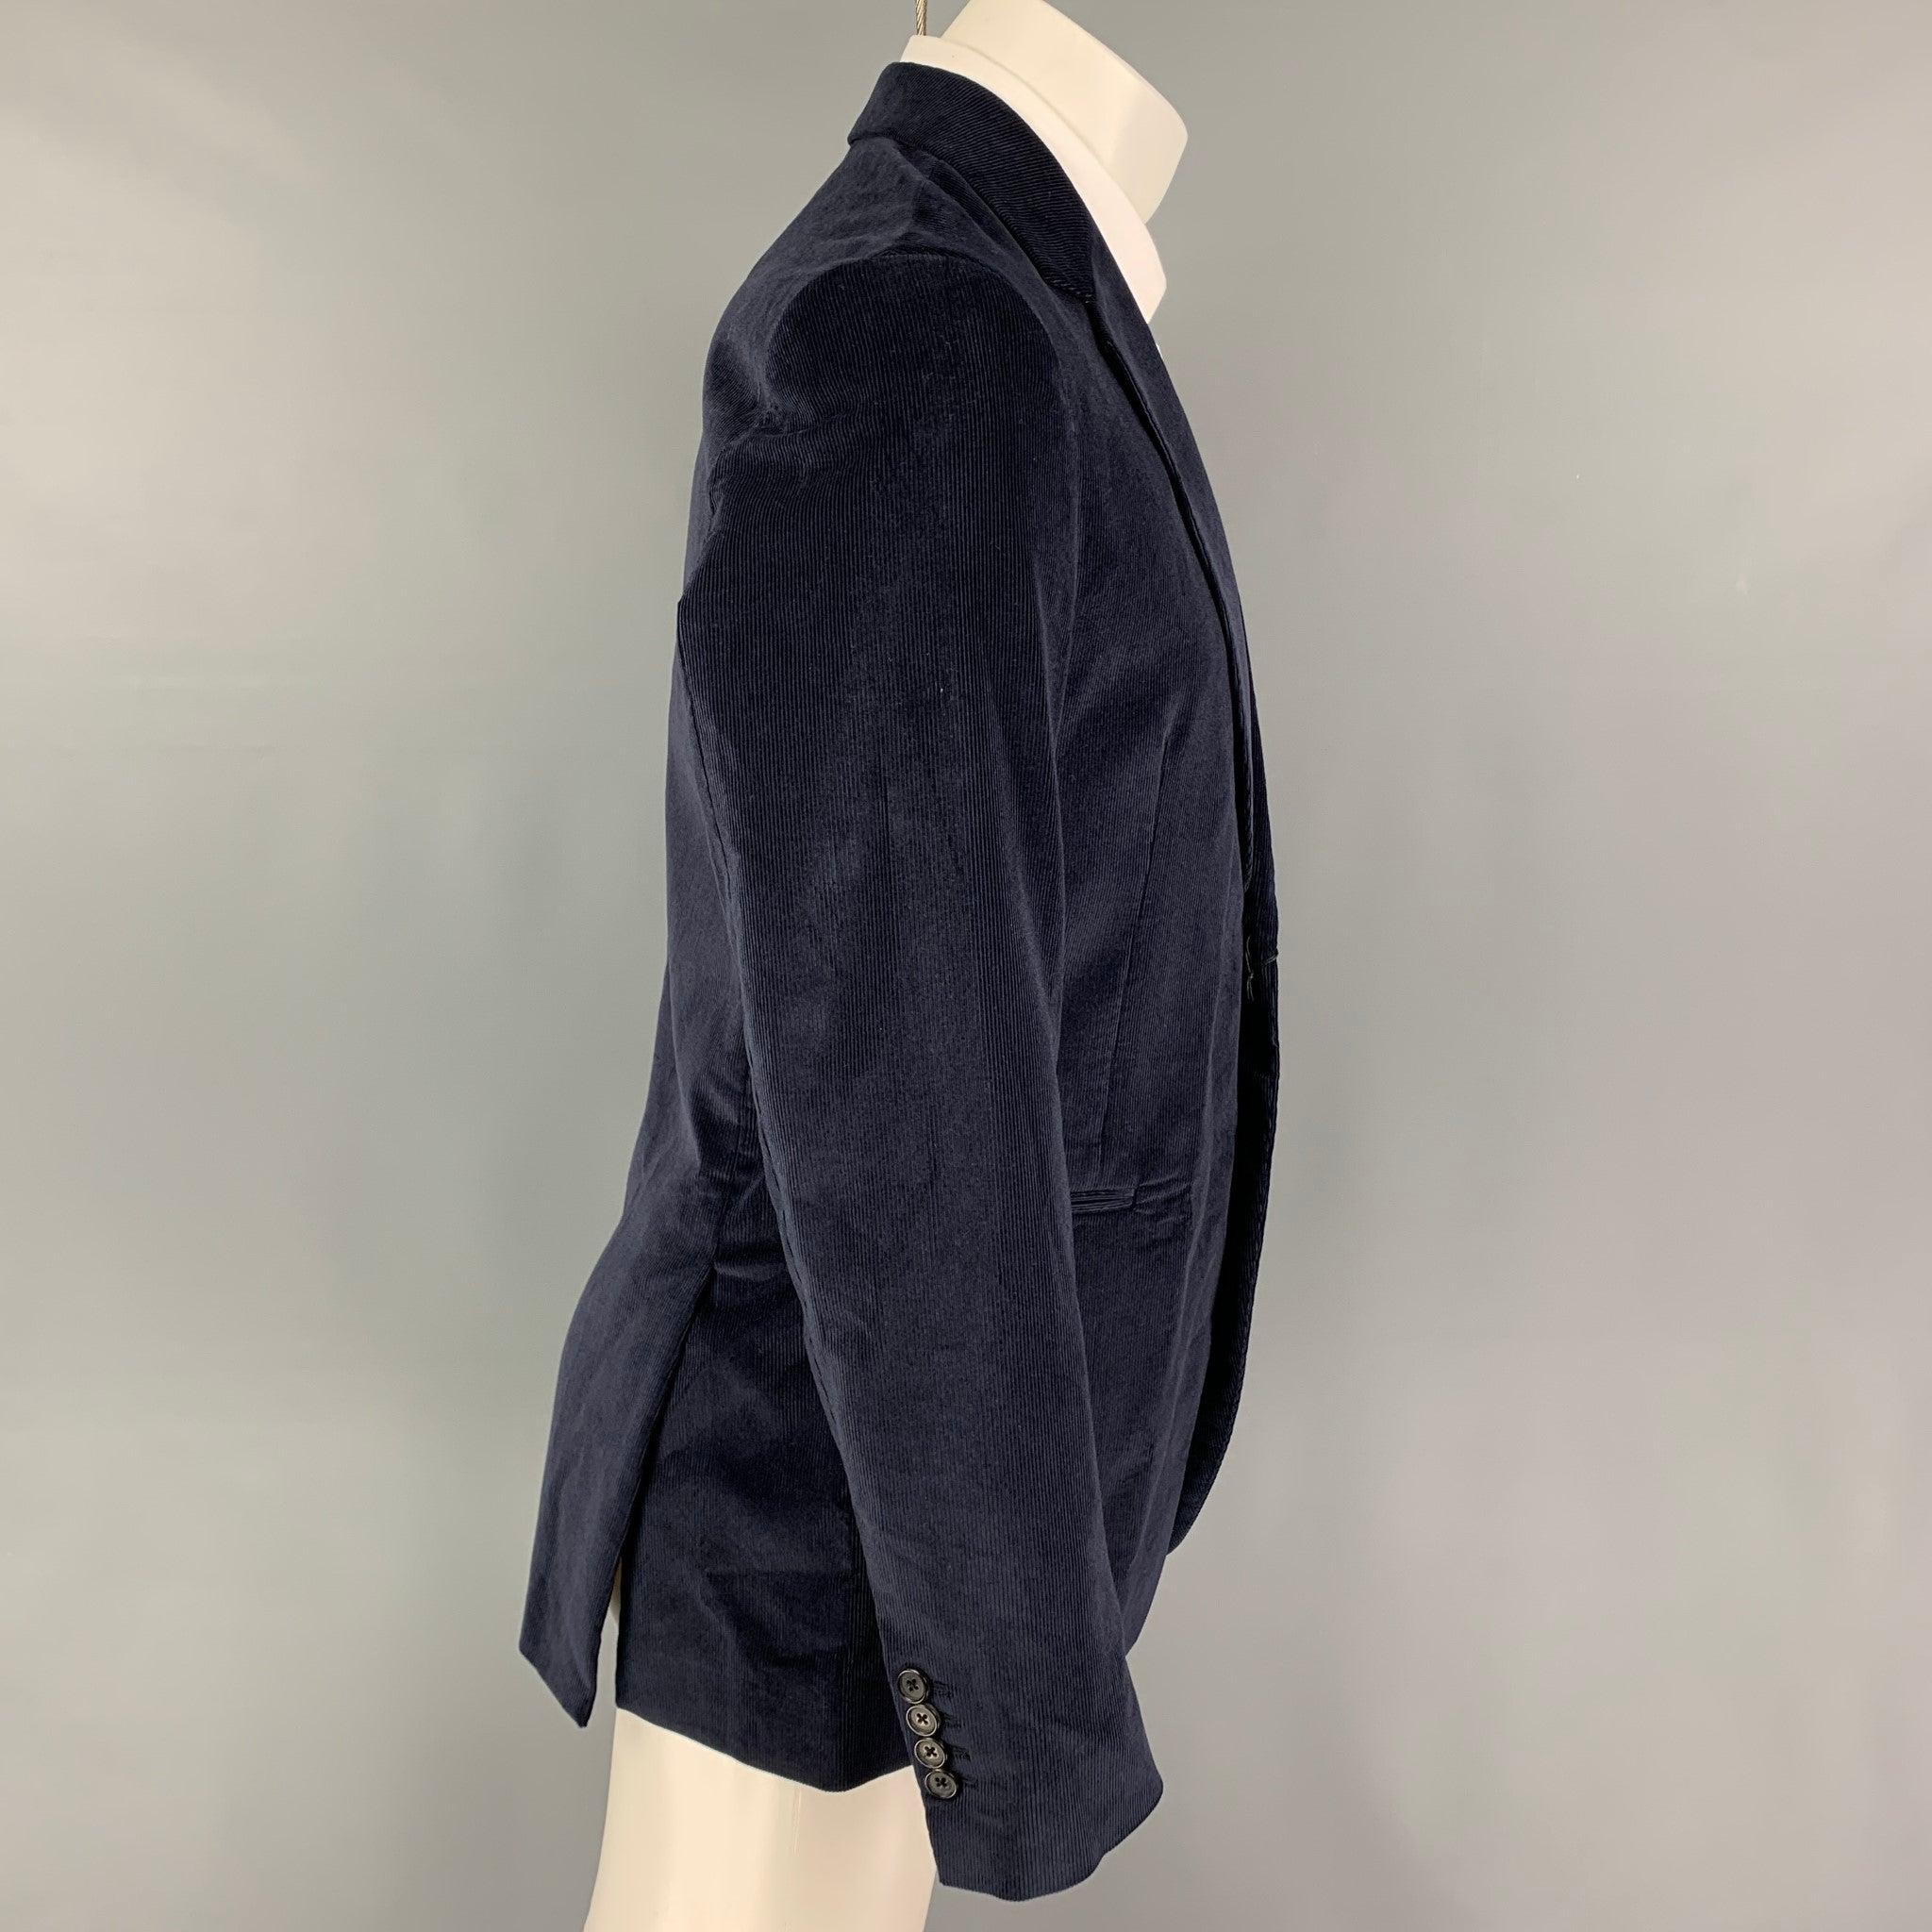 PAUL SMITH sport coat comes in a navy corduroy cotton with a full liner featuring a notch lapel, slit pockets, double back vent, and a double button closure. Made in Italy. New with tags.  

Marked:   38 

Measurements: 
 
Shoulder: 17.5 inches